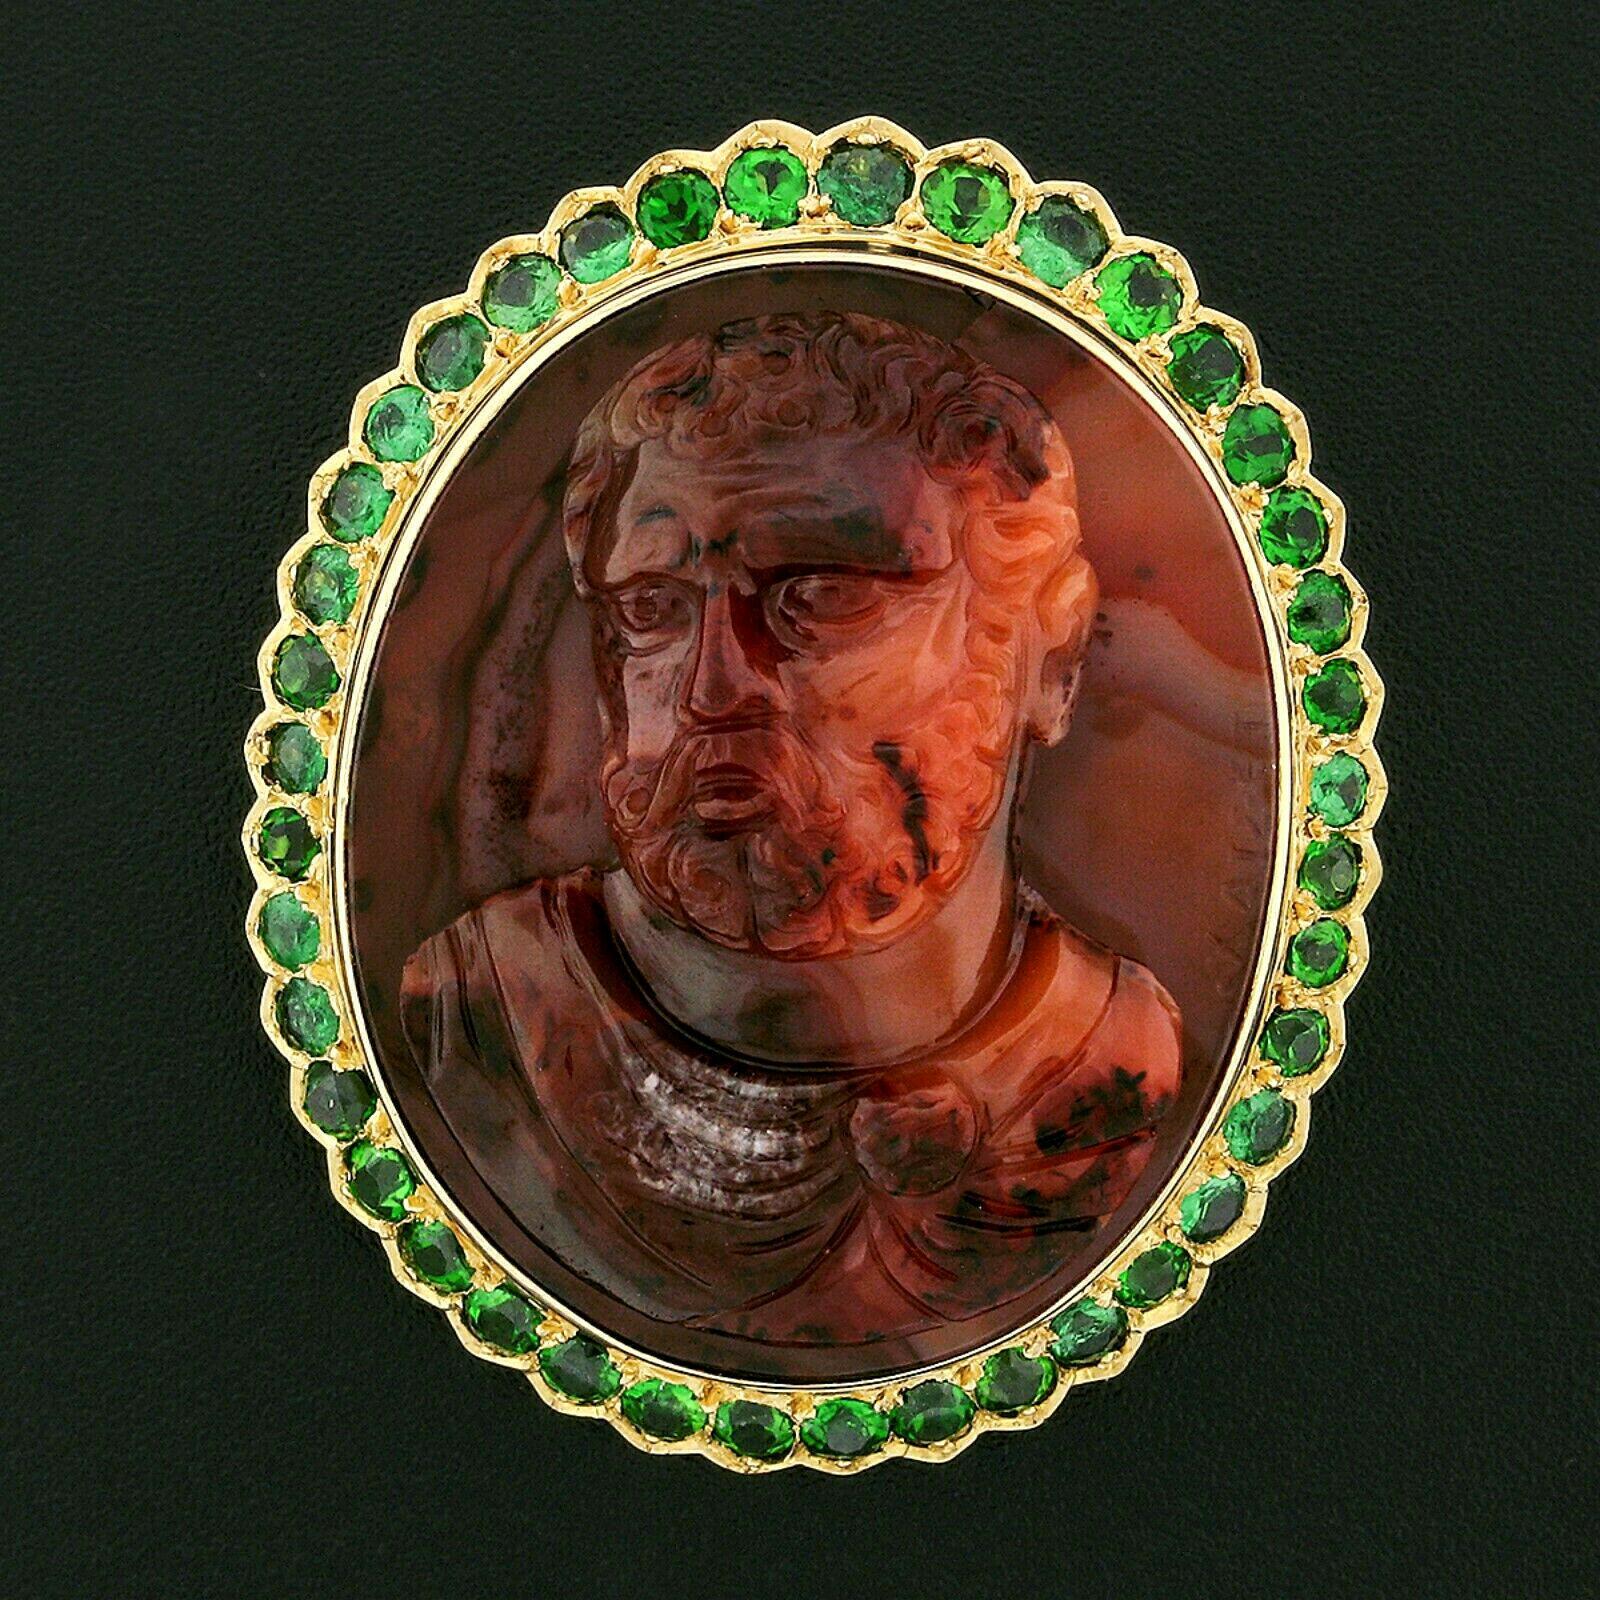 Here we have a large and unique vintage pendant or brooch that was crafted from solid 18k yellow gold. The pendant features a magnificent carved agate cameo of a man in a toga with short hair and matching beard. The carving is surrounded by a halo